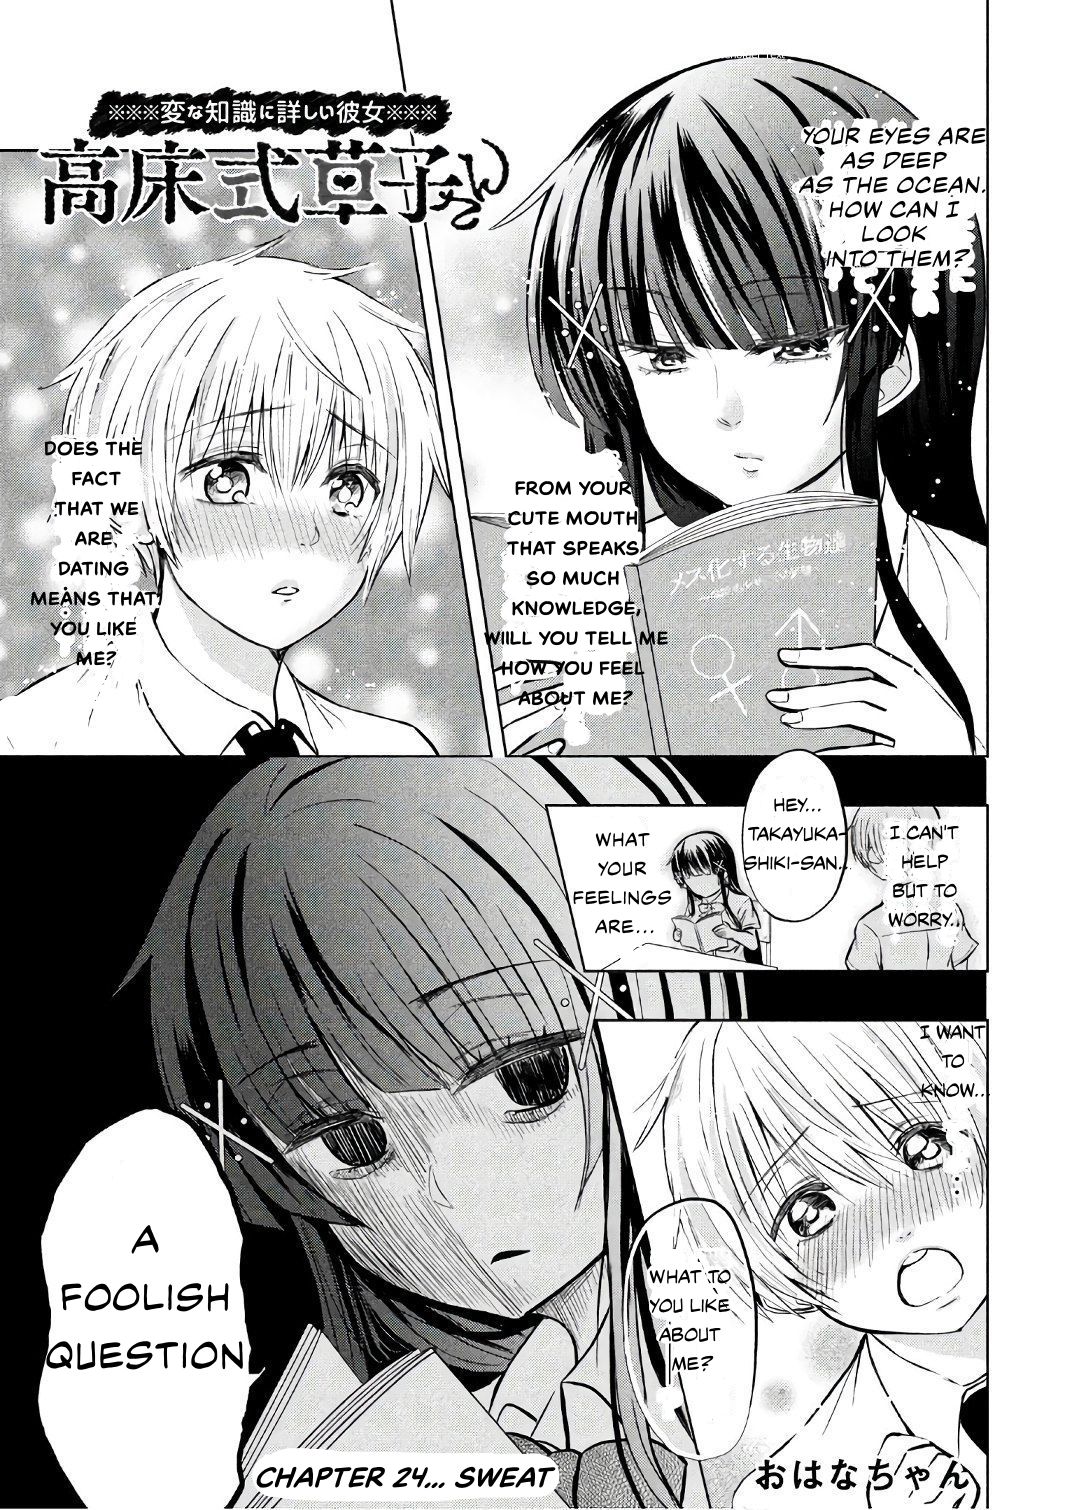 A Girl Who Is Very Well-Informed About Weird Knowledge, Takayukashiki Souko-San Chapter 24 #1